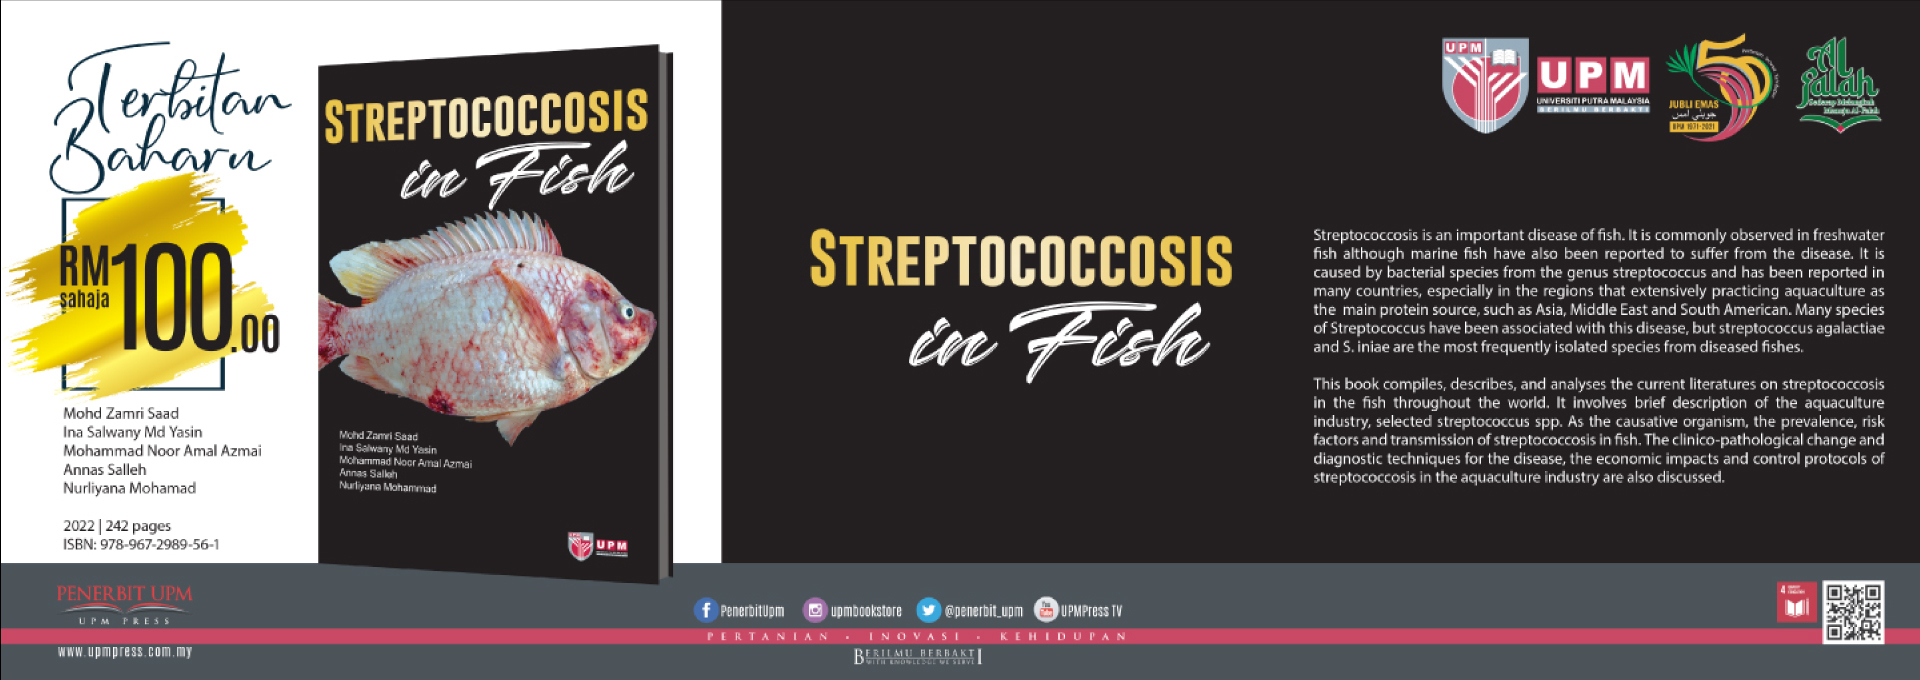 New Publication12_Streptococcosis in Fish